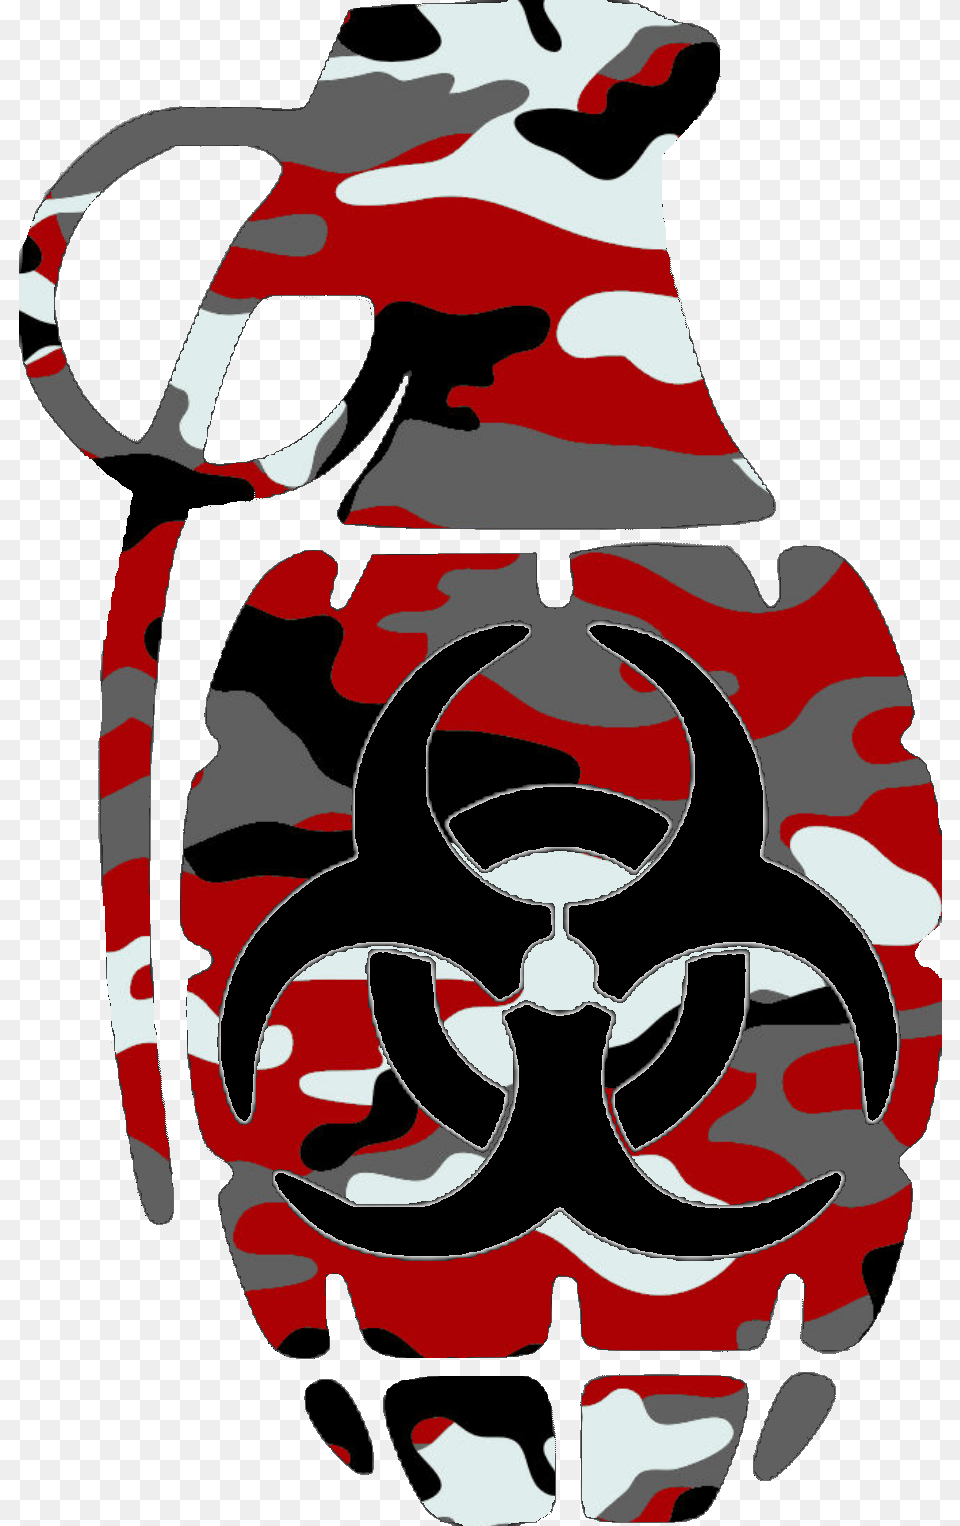 Red Camouflage Grenade Images, Jar, Stencil, Pottery, Baby Free Transparent Png